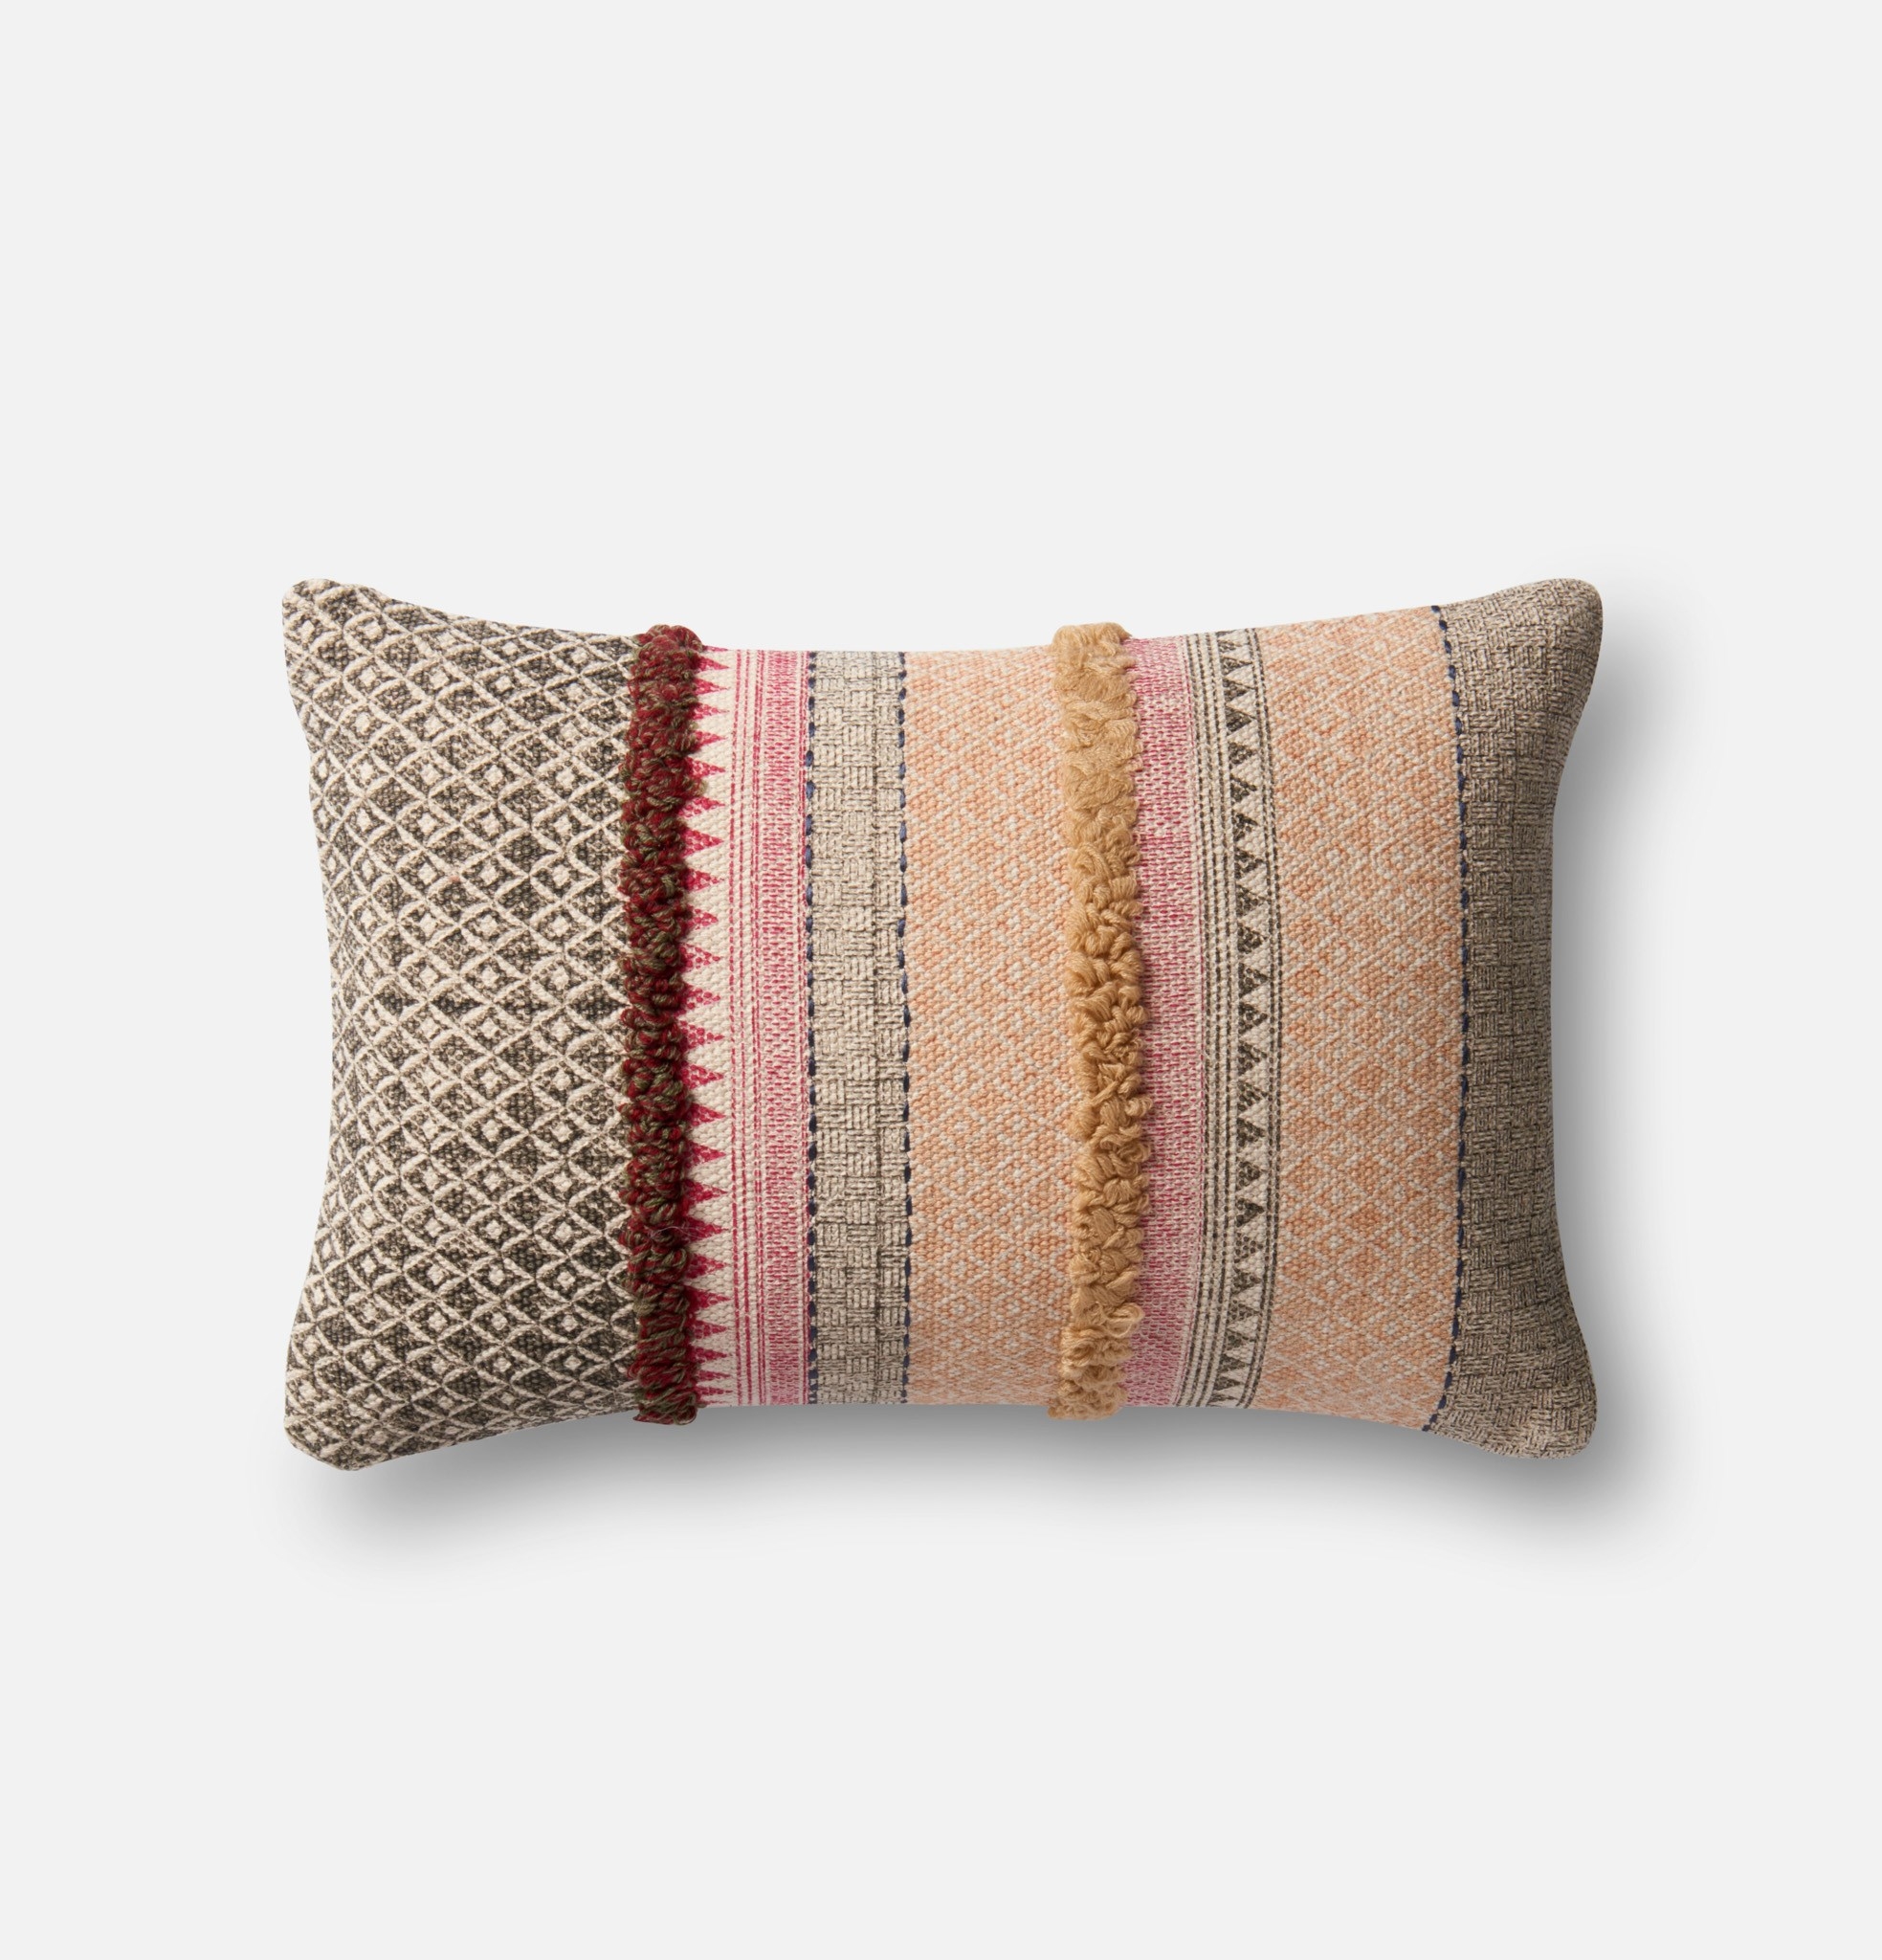 PILLOWS - PINK / BEIGE - Image 0